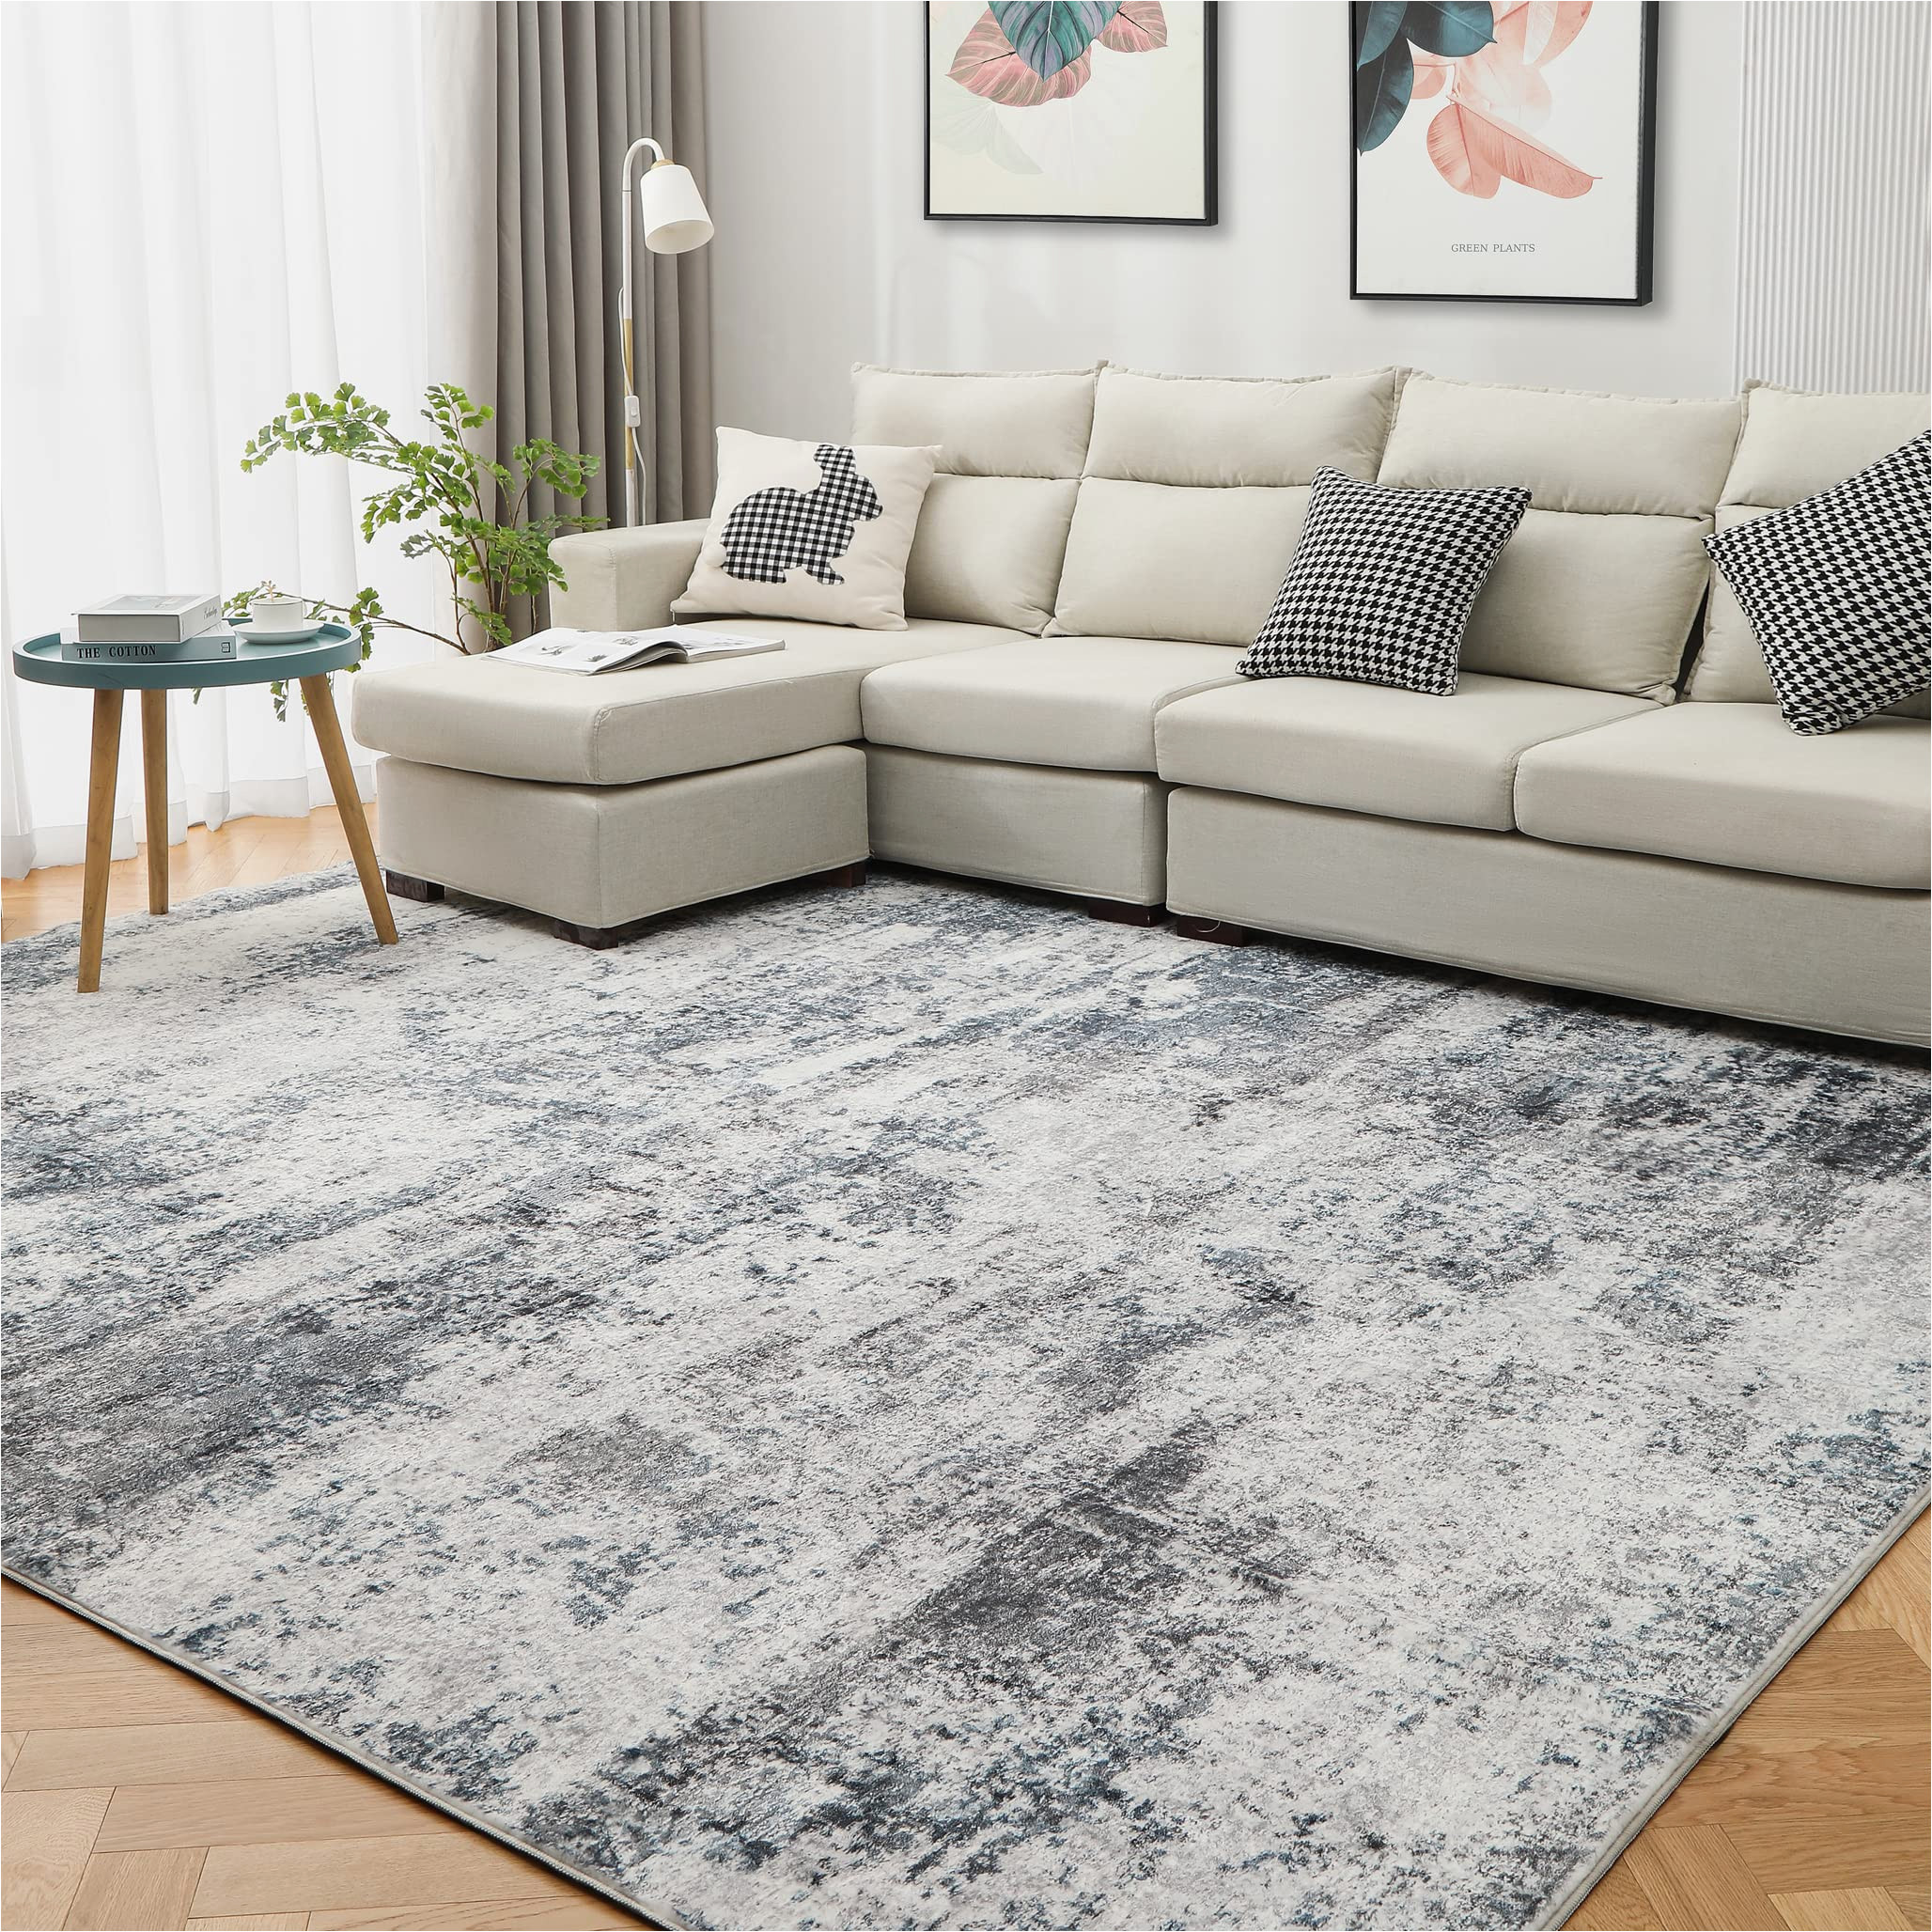 Washable Living Room area Rugs area Rug Living Room Rugs: 3×5 Indoor Abstract soft Fluffy Pile Large Carpet with Low Shaggy for Bedroom Dining Room Home Office Decor Under Kitchen …